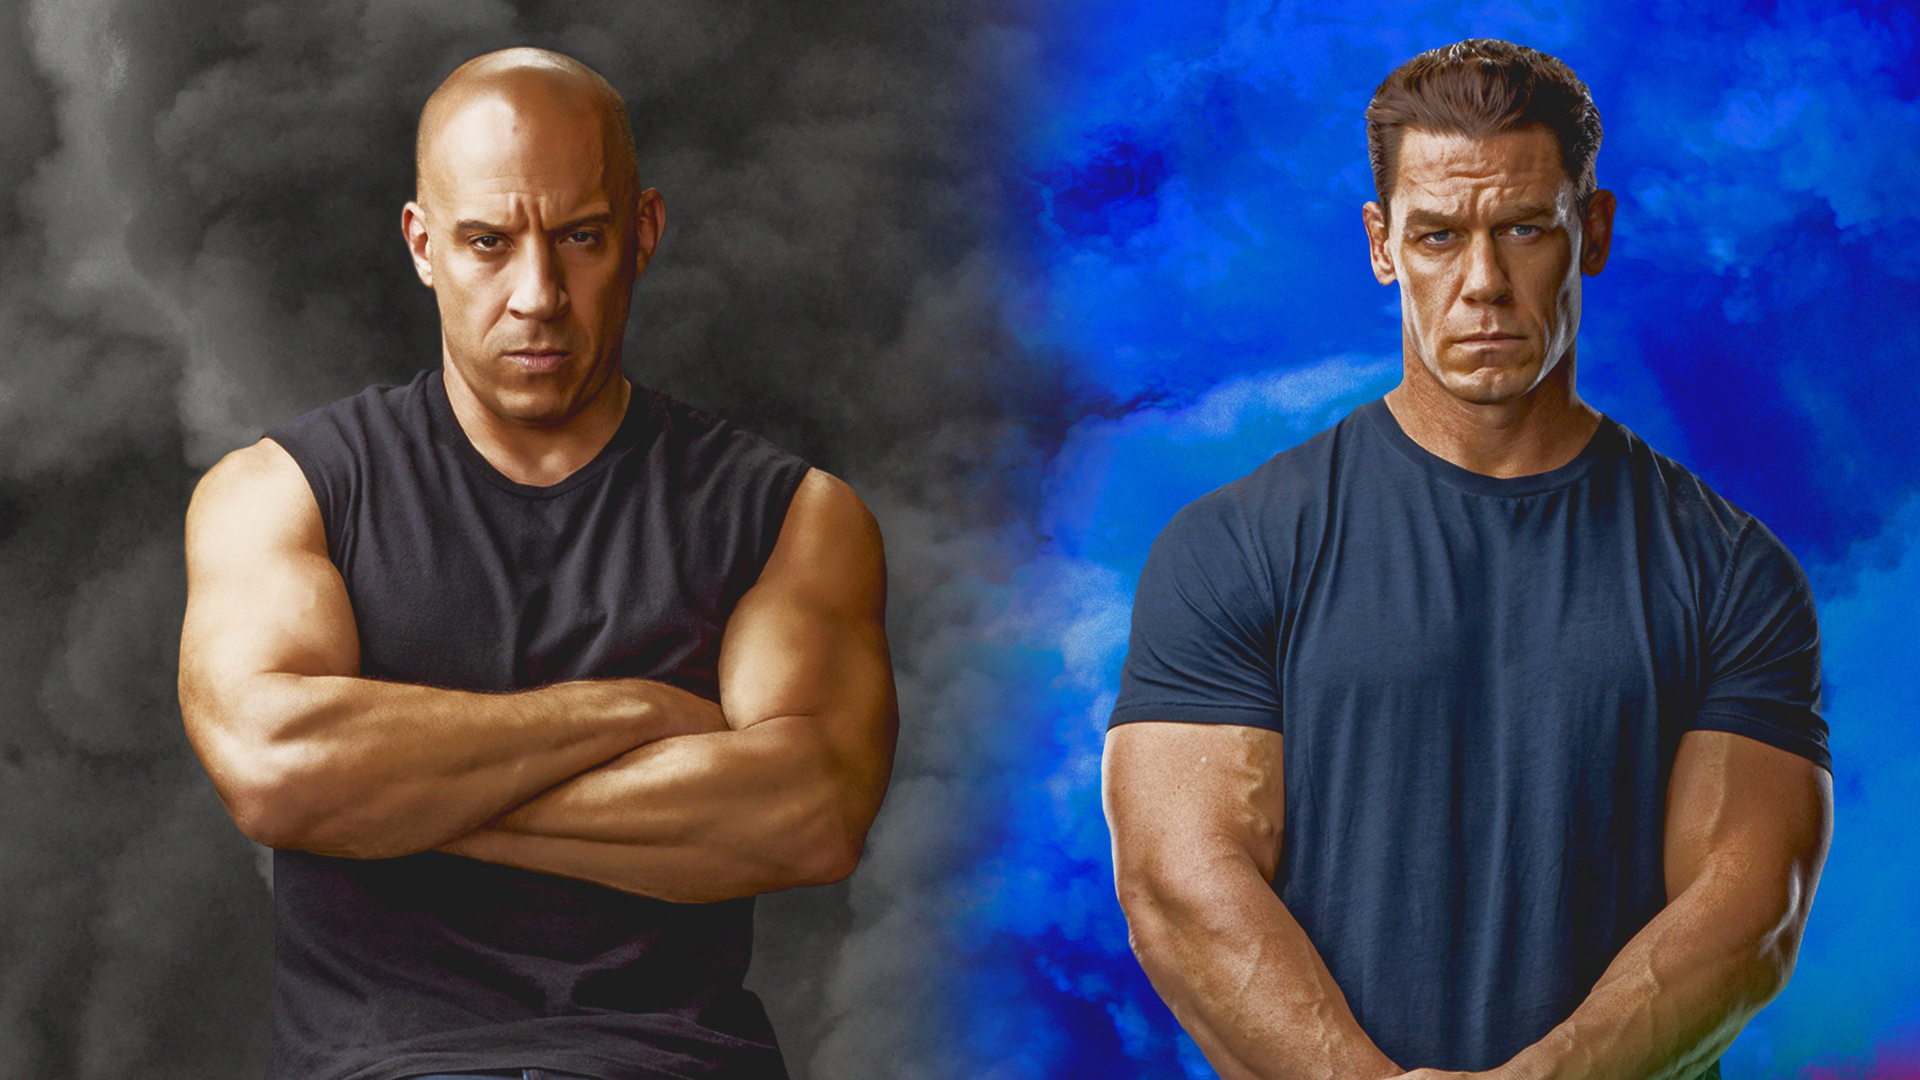 1920x1080 Vin Diesel And John Cena In Fast And Furious Laptop Full HD ...